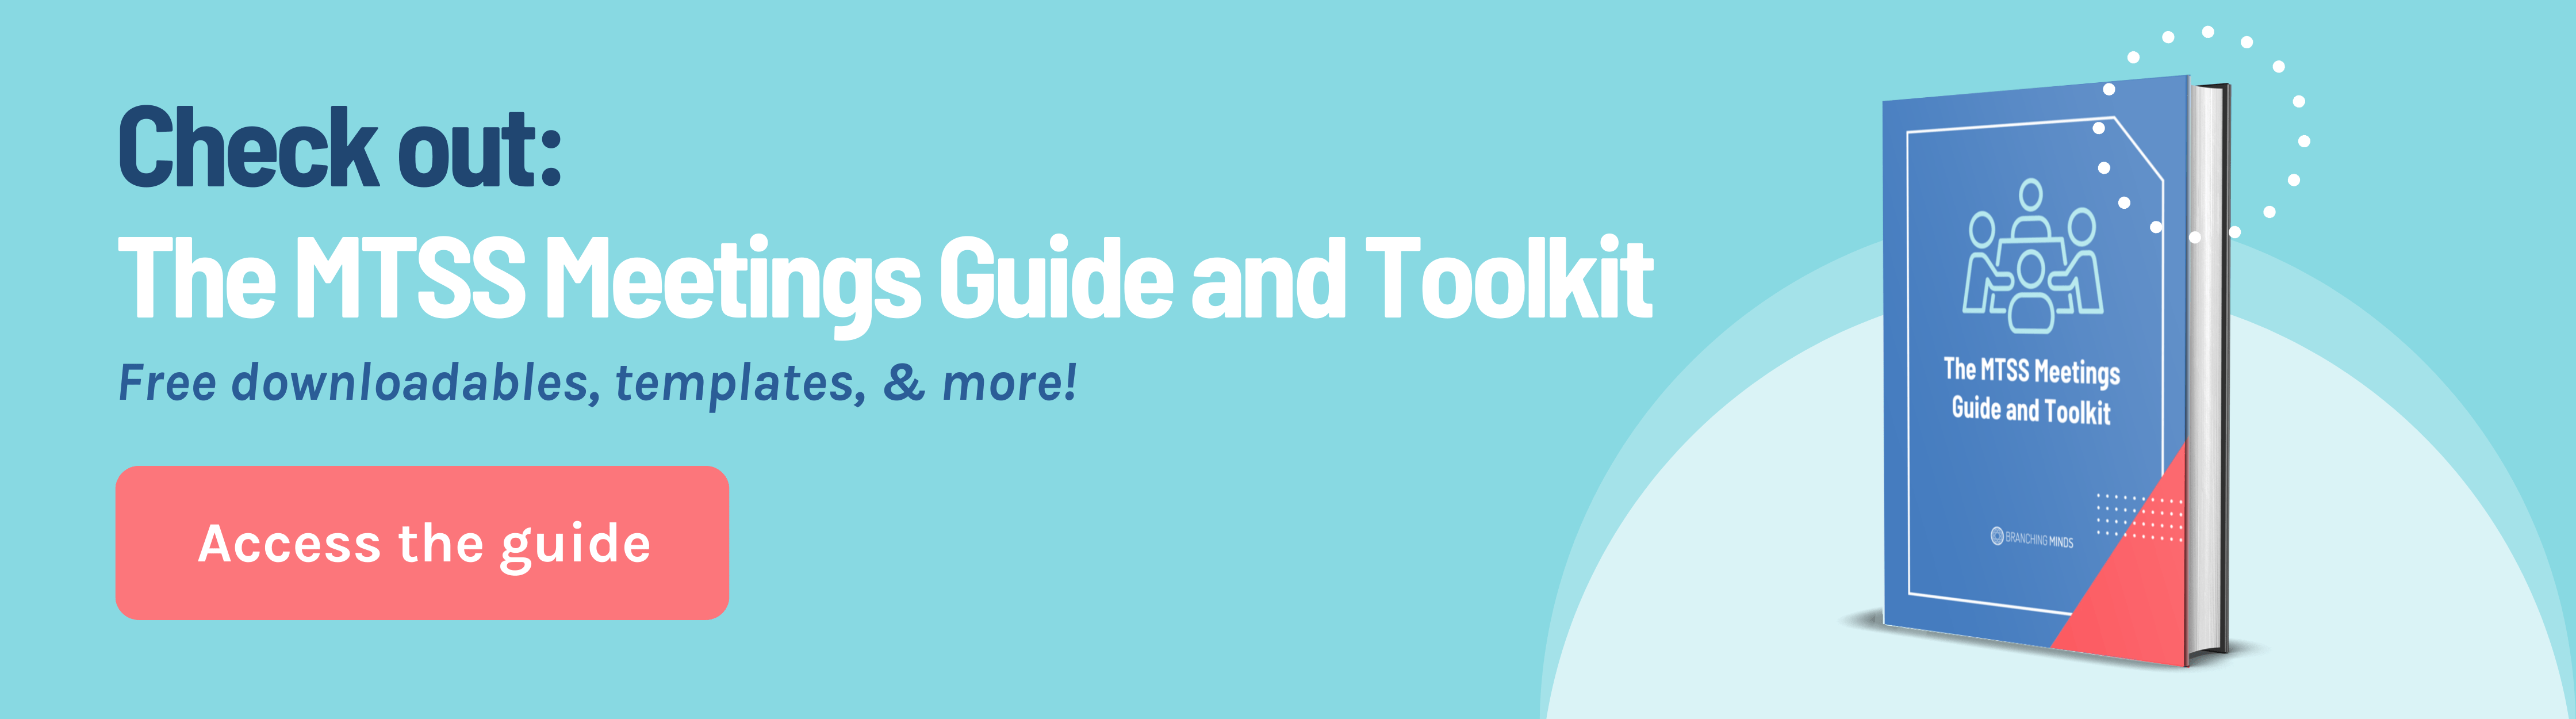 access-the-mtss-meetings-guide-toolkit